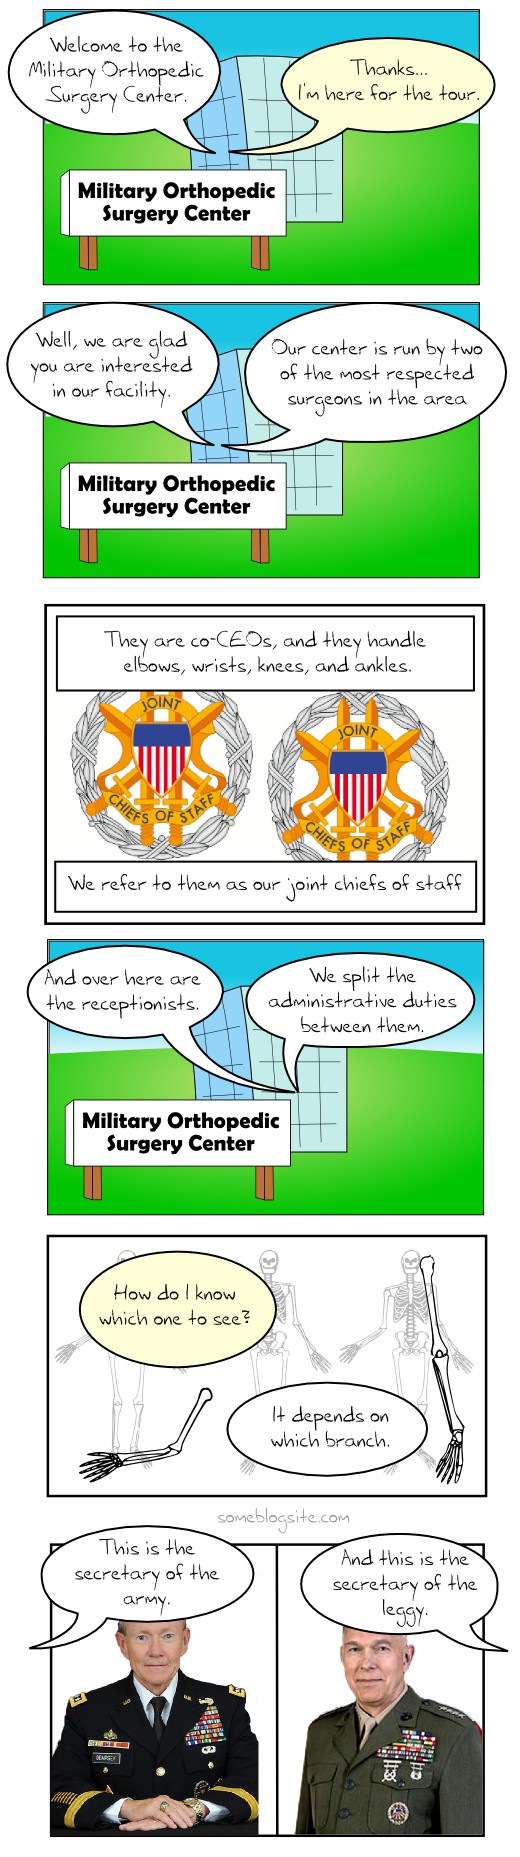 comic about joint chiefs of staff running an orthopedic medical center with the secretaries of the army and leggy